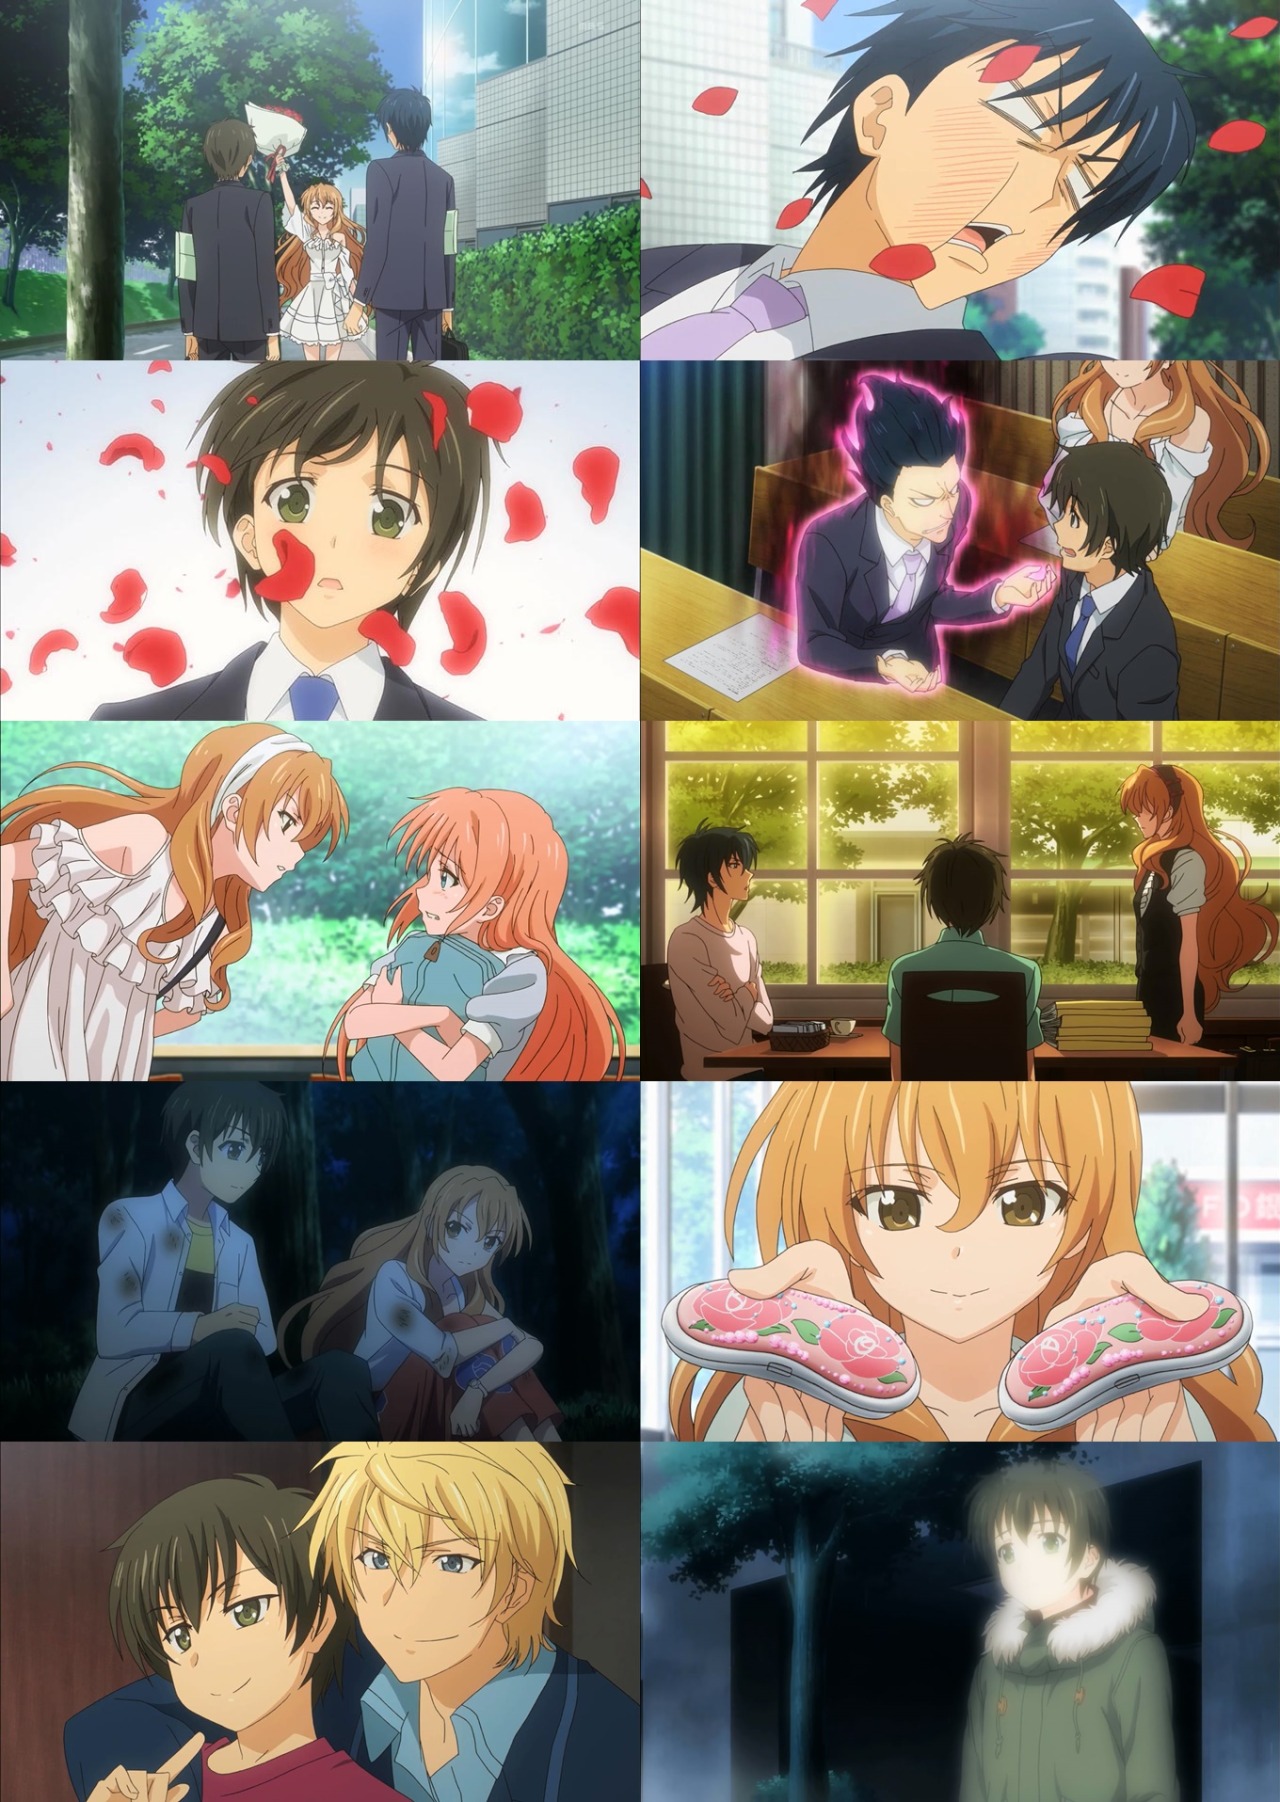 Golden Time: Collection 2